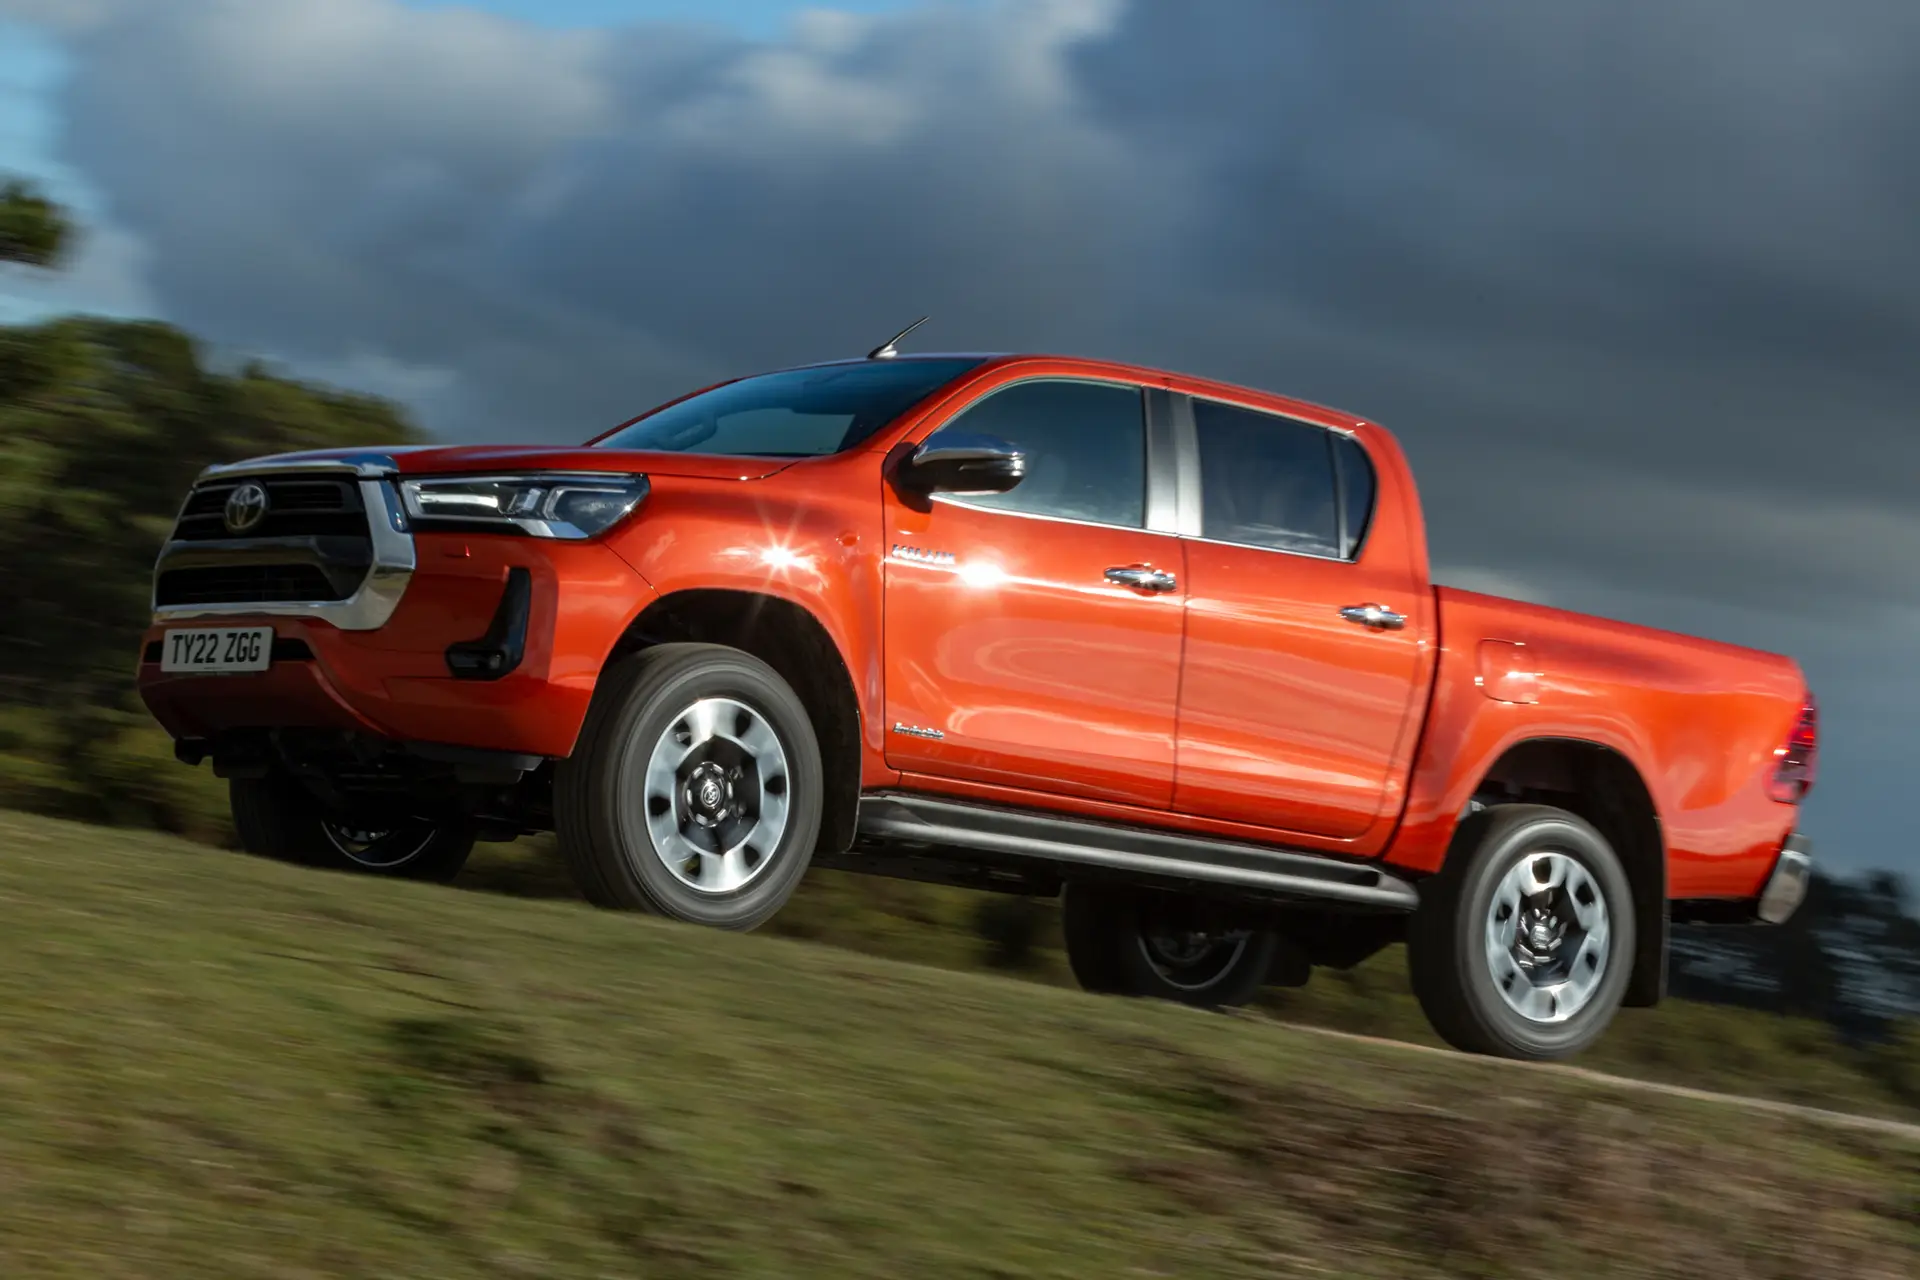 Toyota Hilux Review: driving